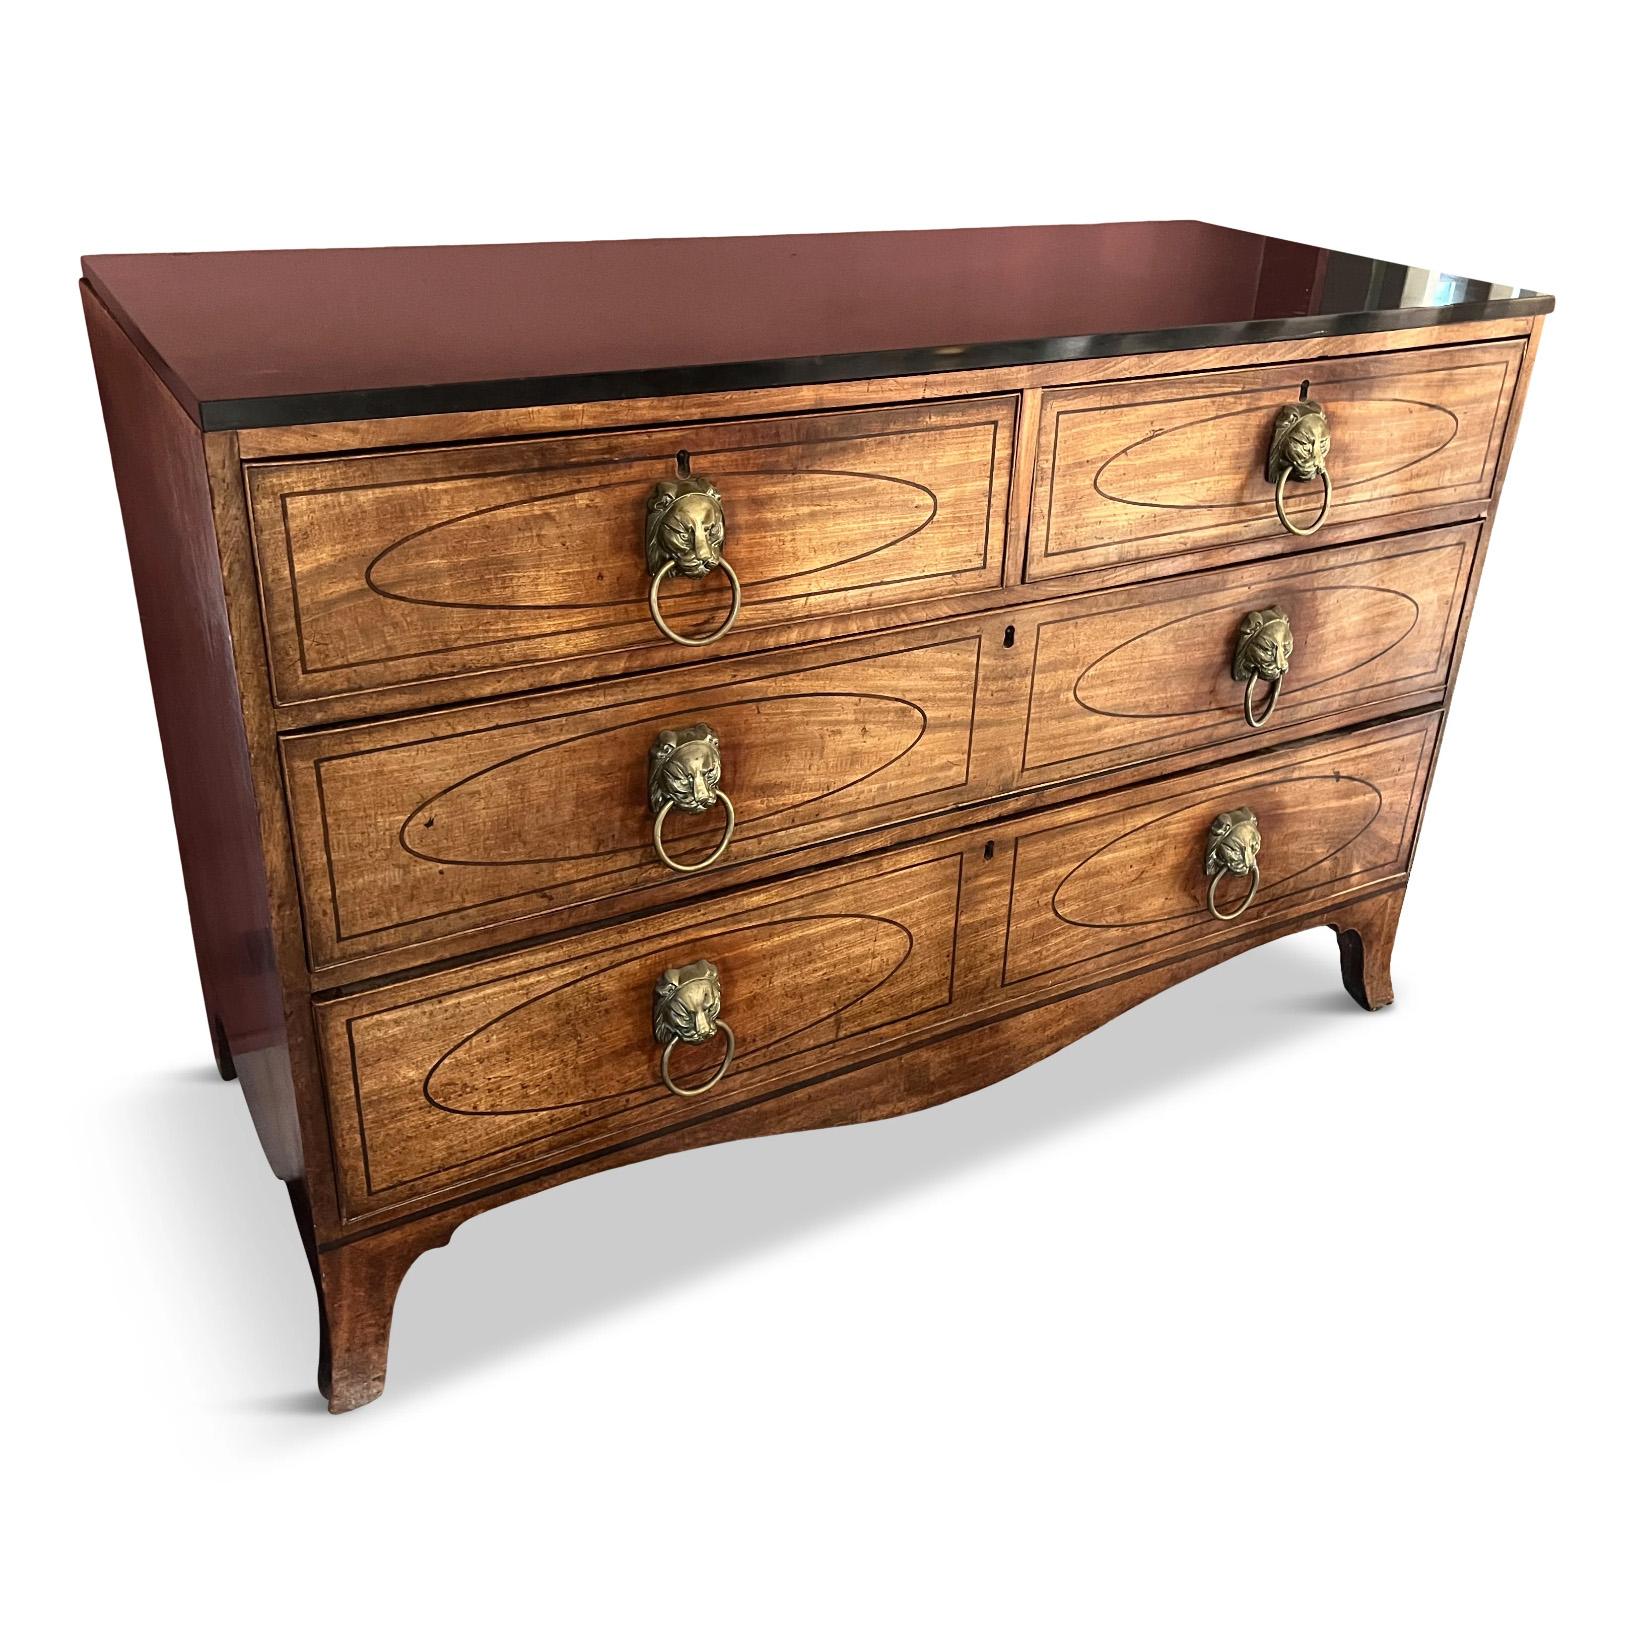 This exquisite vintage mahogany dresser with classic brass pulls featuring lion heads is set apart by its stunning black marble top. Its fine craftsmanship and timeless design make it a must-have for any discerning collector of luxury furniture.